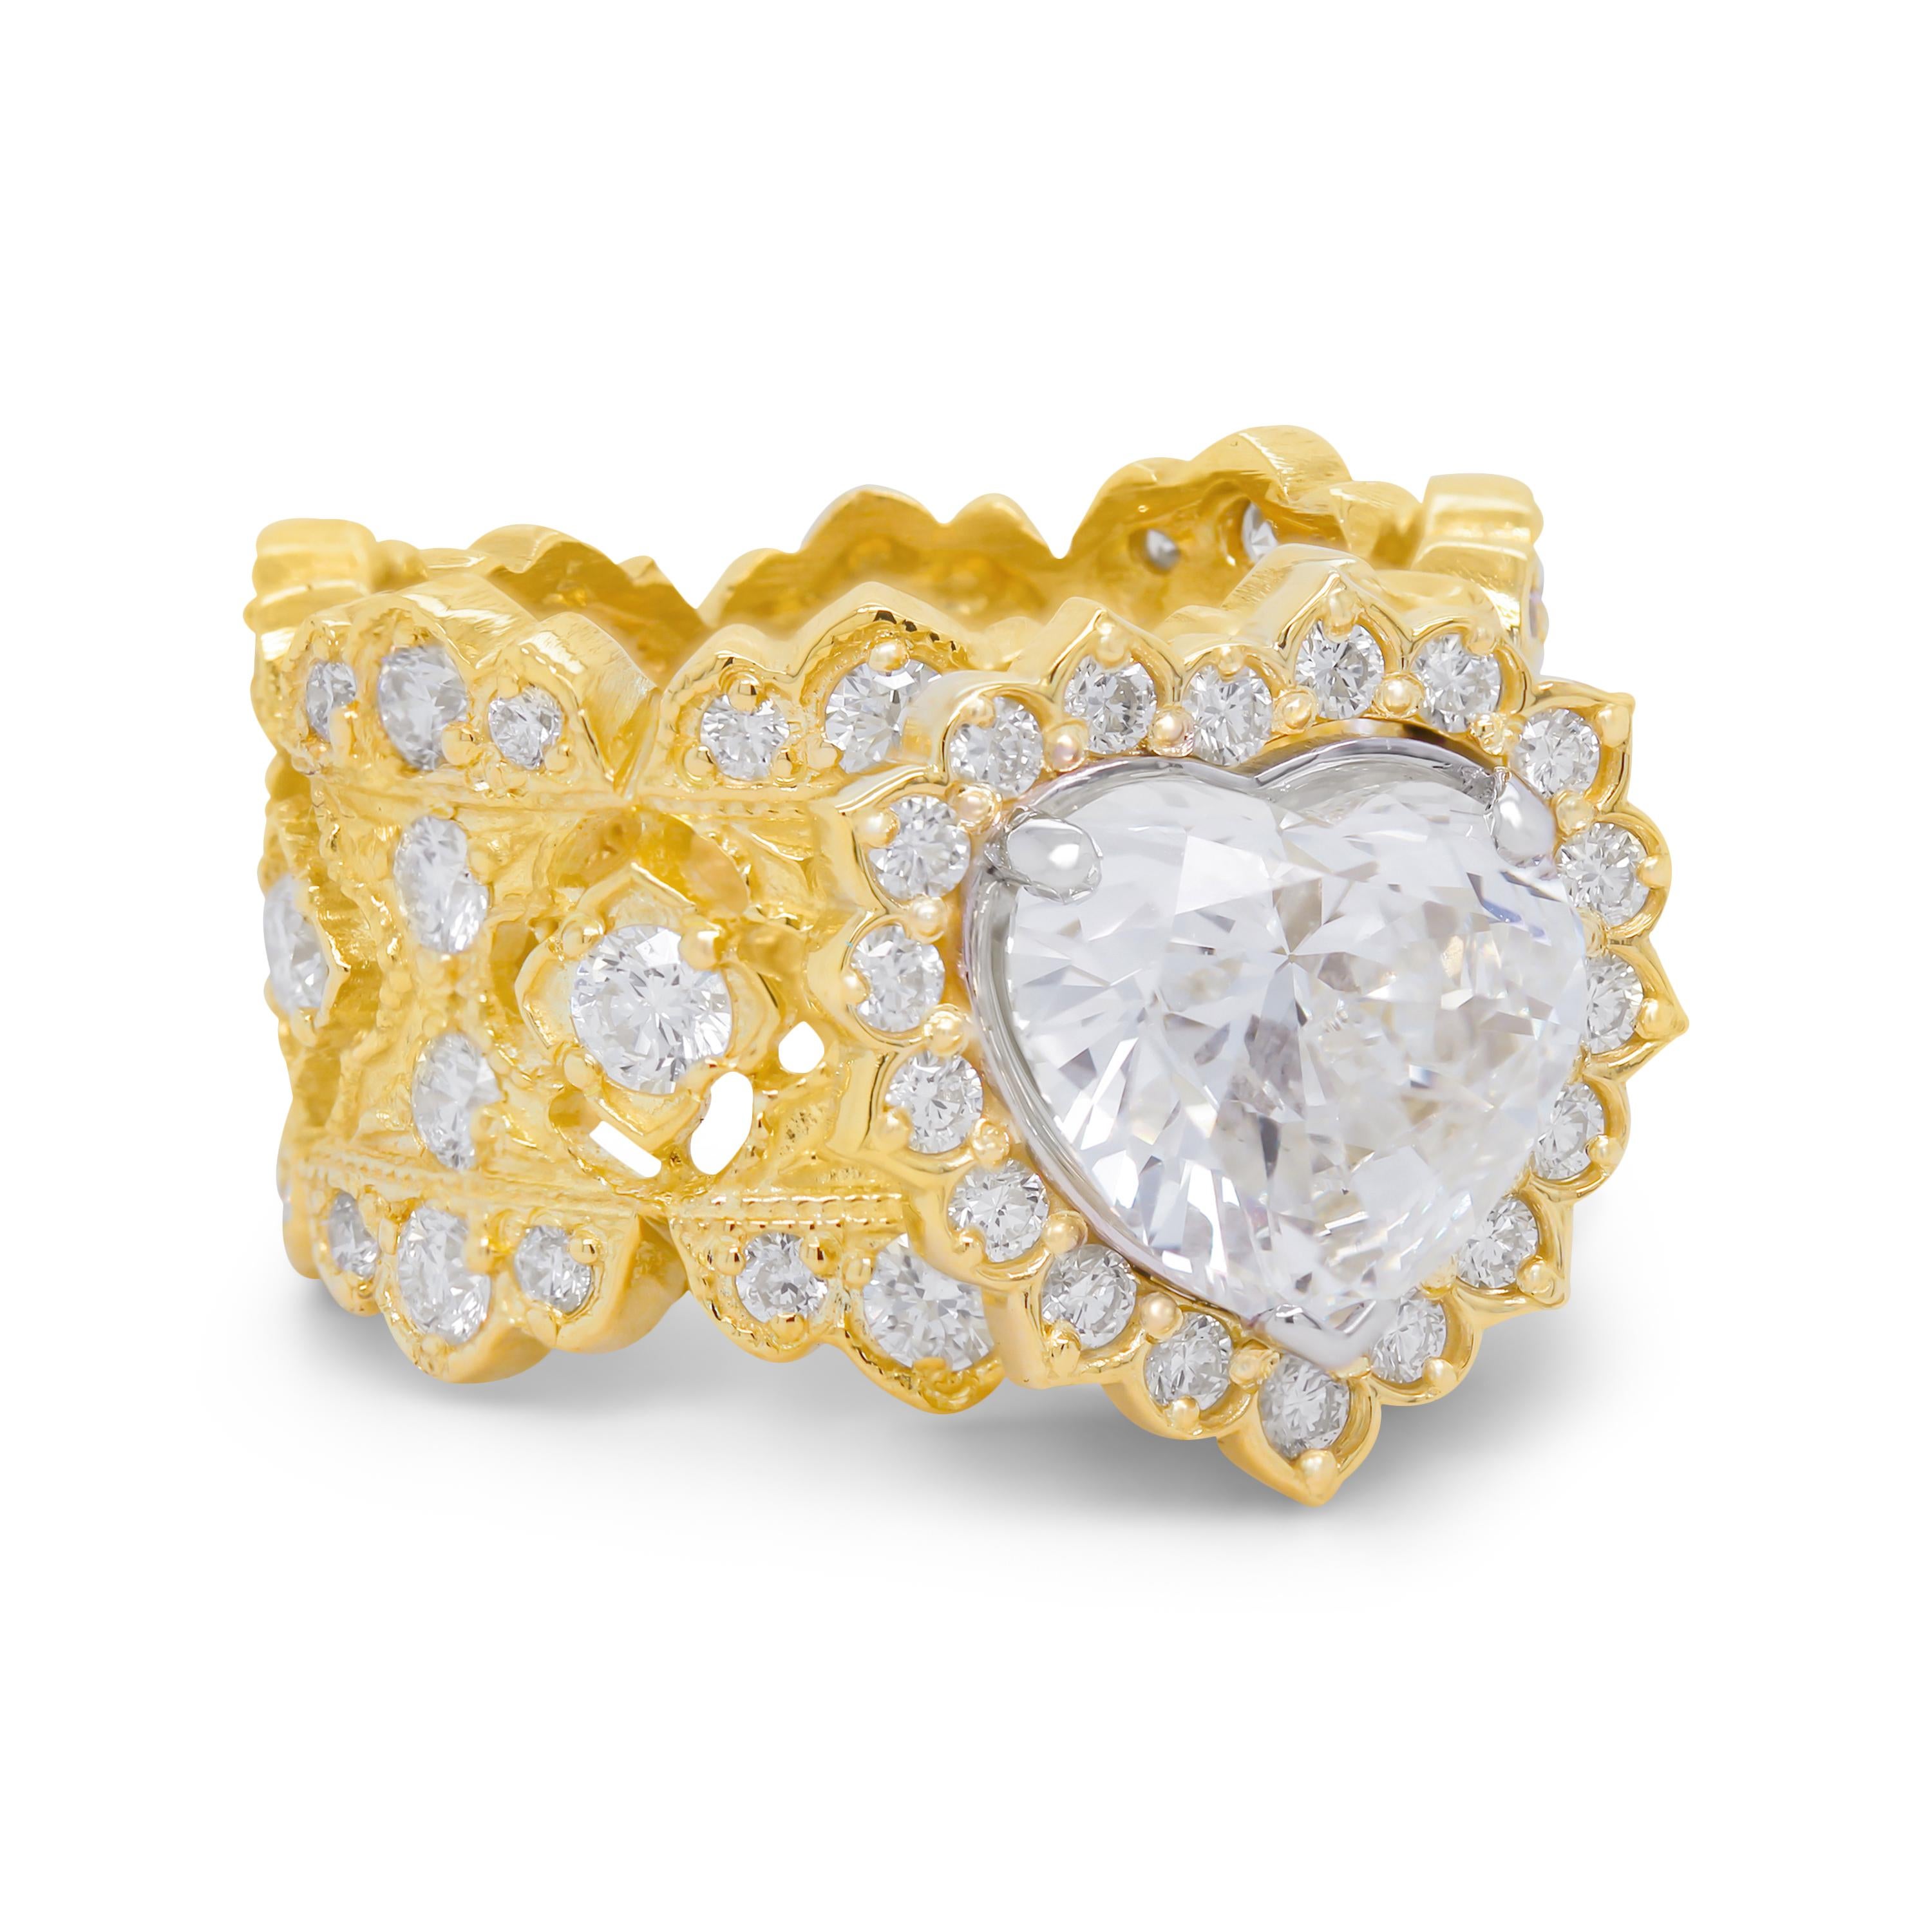 Stambolian GIA Certified 2.44 Carat Heart Shape Diamond 18K Gold Ring

This one-of-a-kind ring features a GIA certified, heart shape, I color, SI1 clarity, 2.44 carat diamond center

Diamonds are also set surrounding the center diamond along with